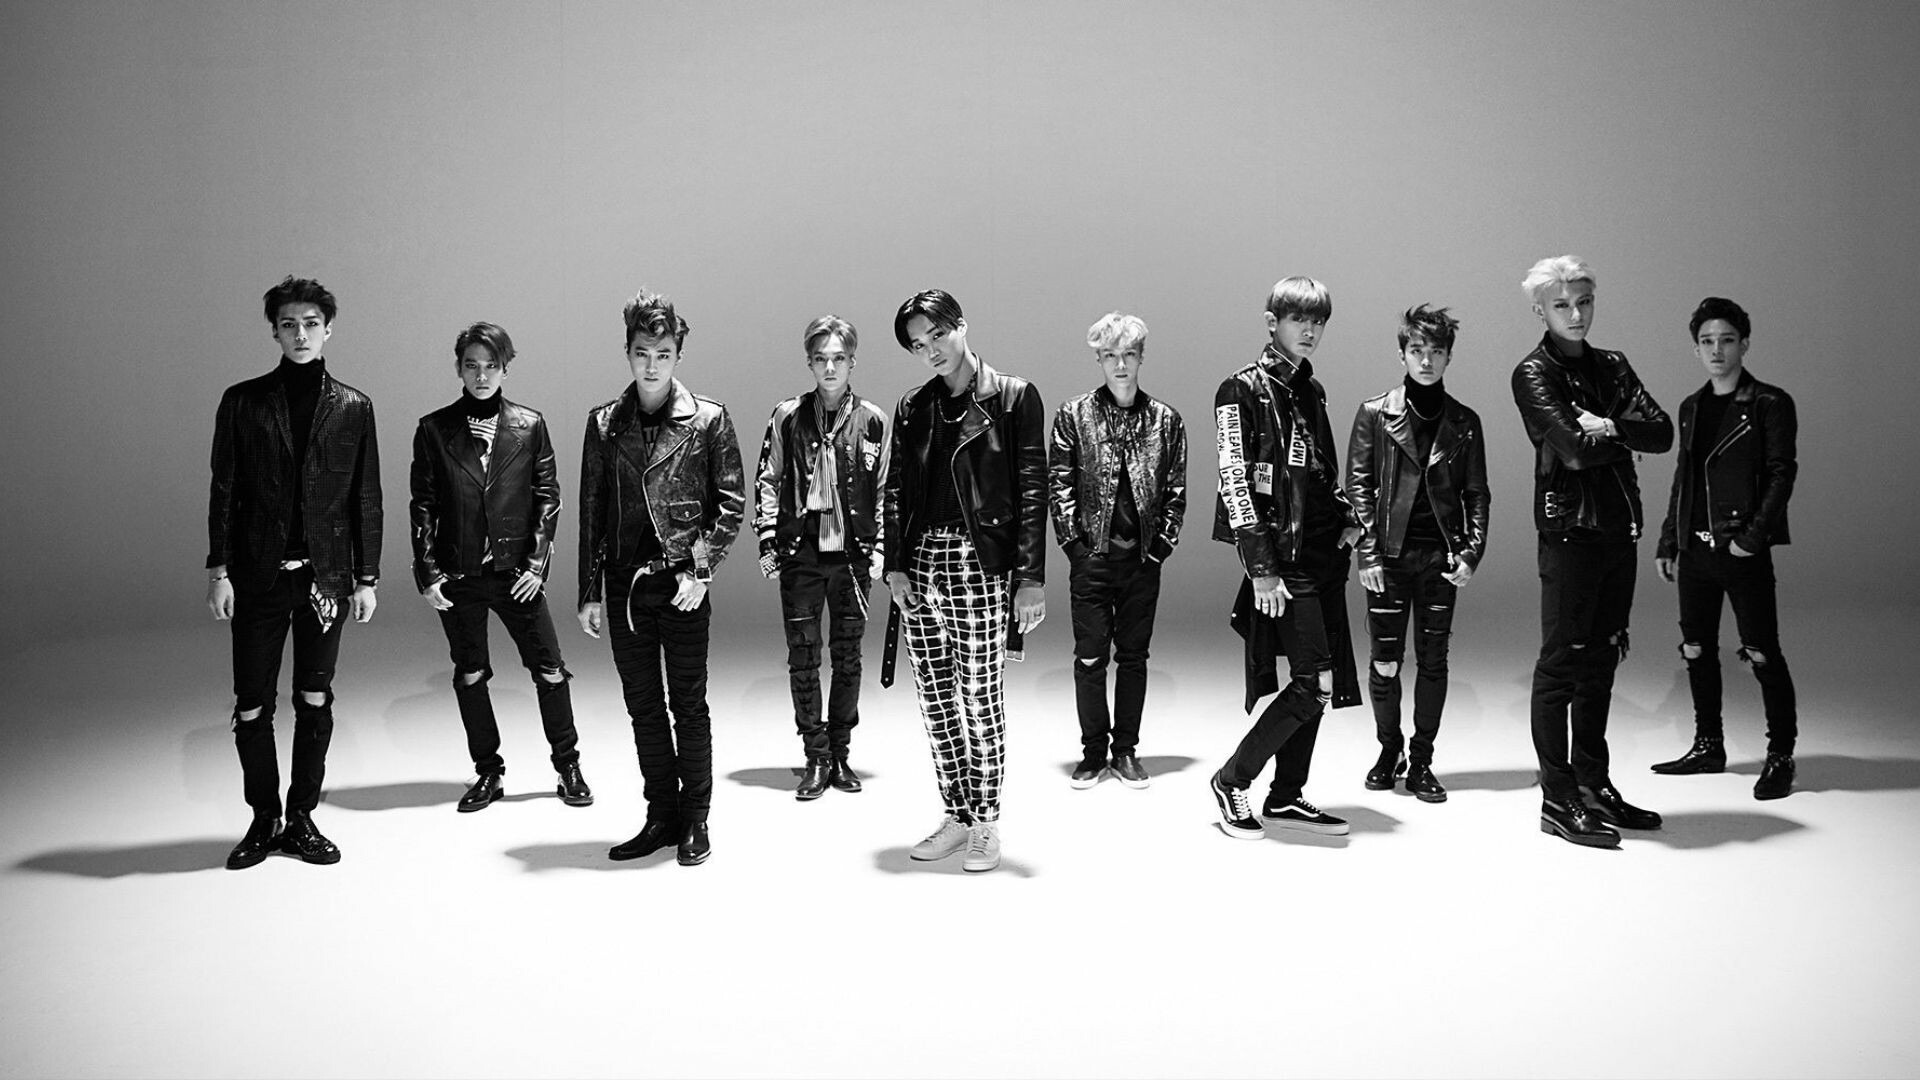 EXO: K and M sub-units debuted with the single "Mama" on April 8, 2012. 1920x1080 Full HD Wallpaper.